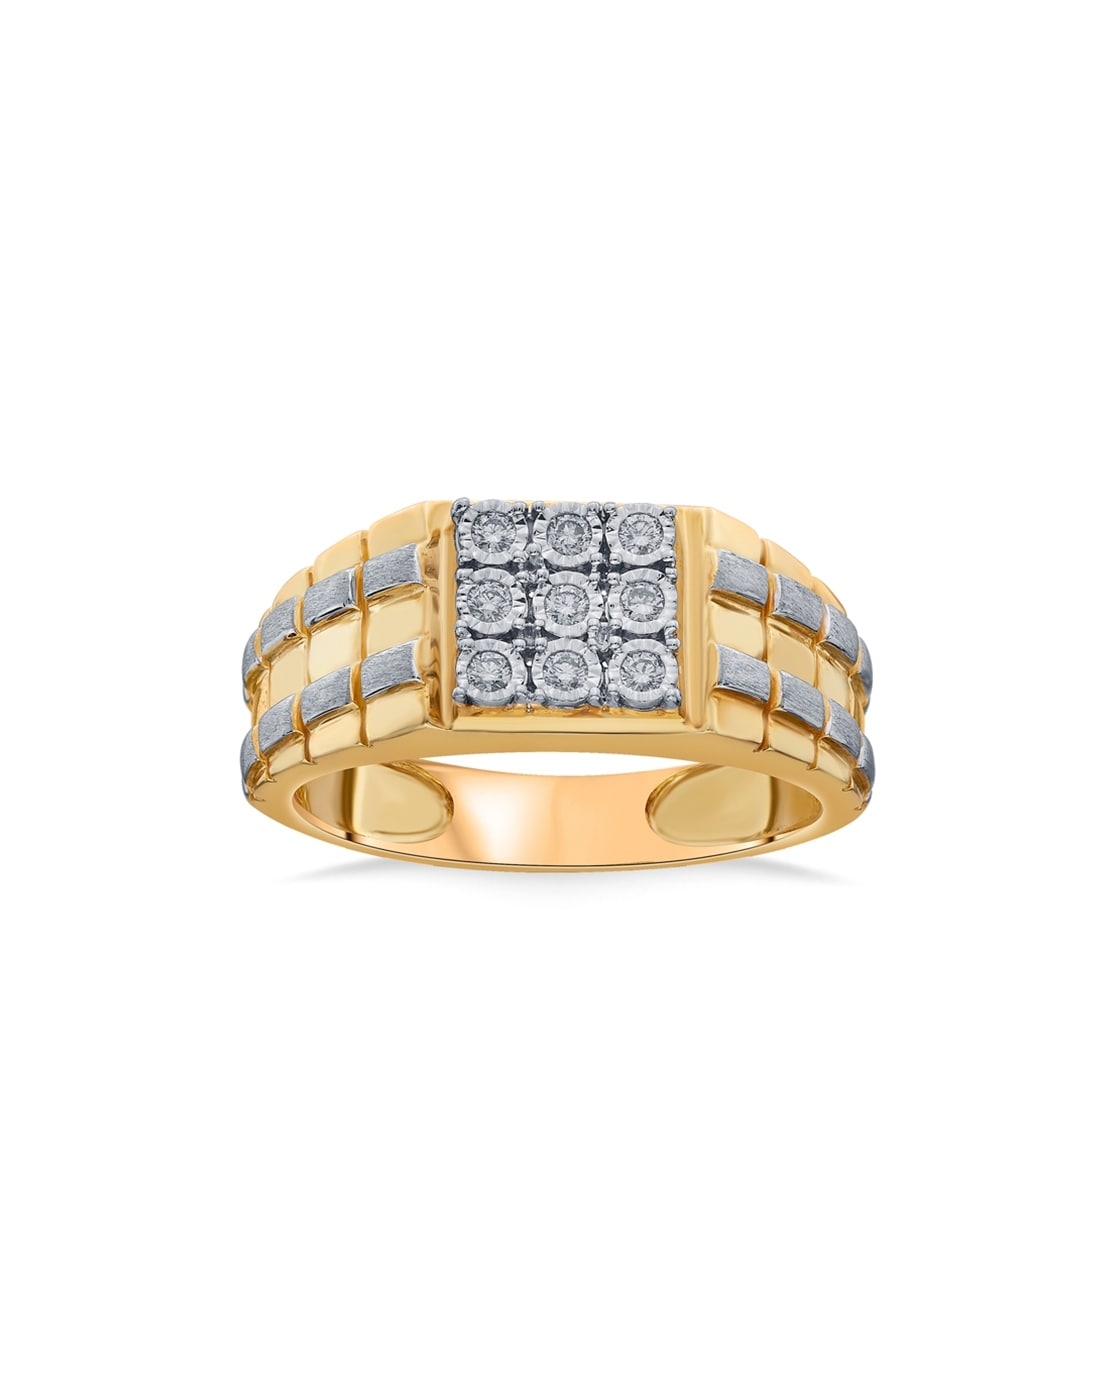 Dazzlingrock Collection Round White Diamond Square Cluster Wedding Ring for  Men (0.30 ctw, Color I-J, Clarity I2-I3) in 10K Yellow Gold, Size 9.5 -  Walmart.com